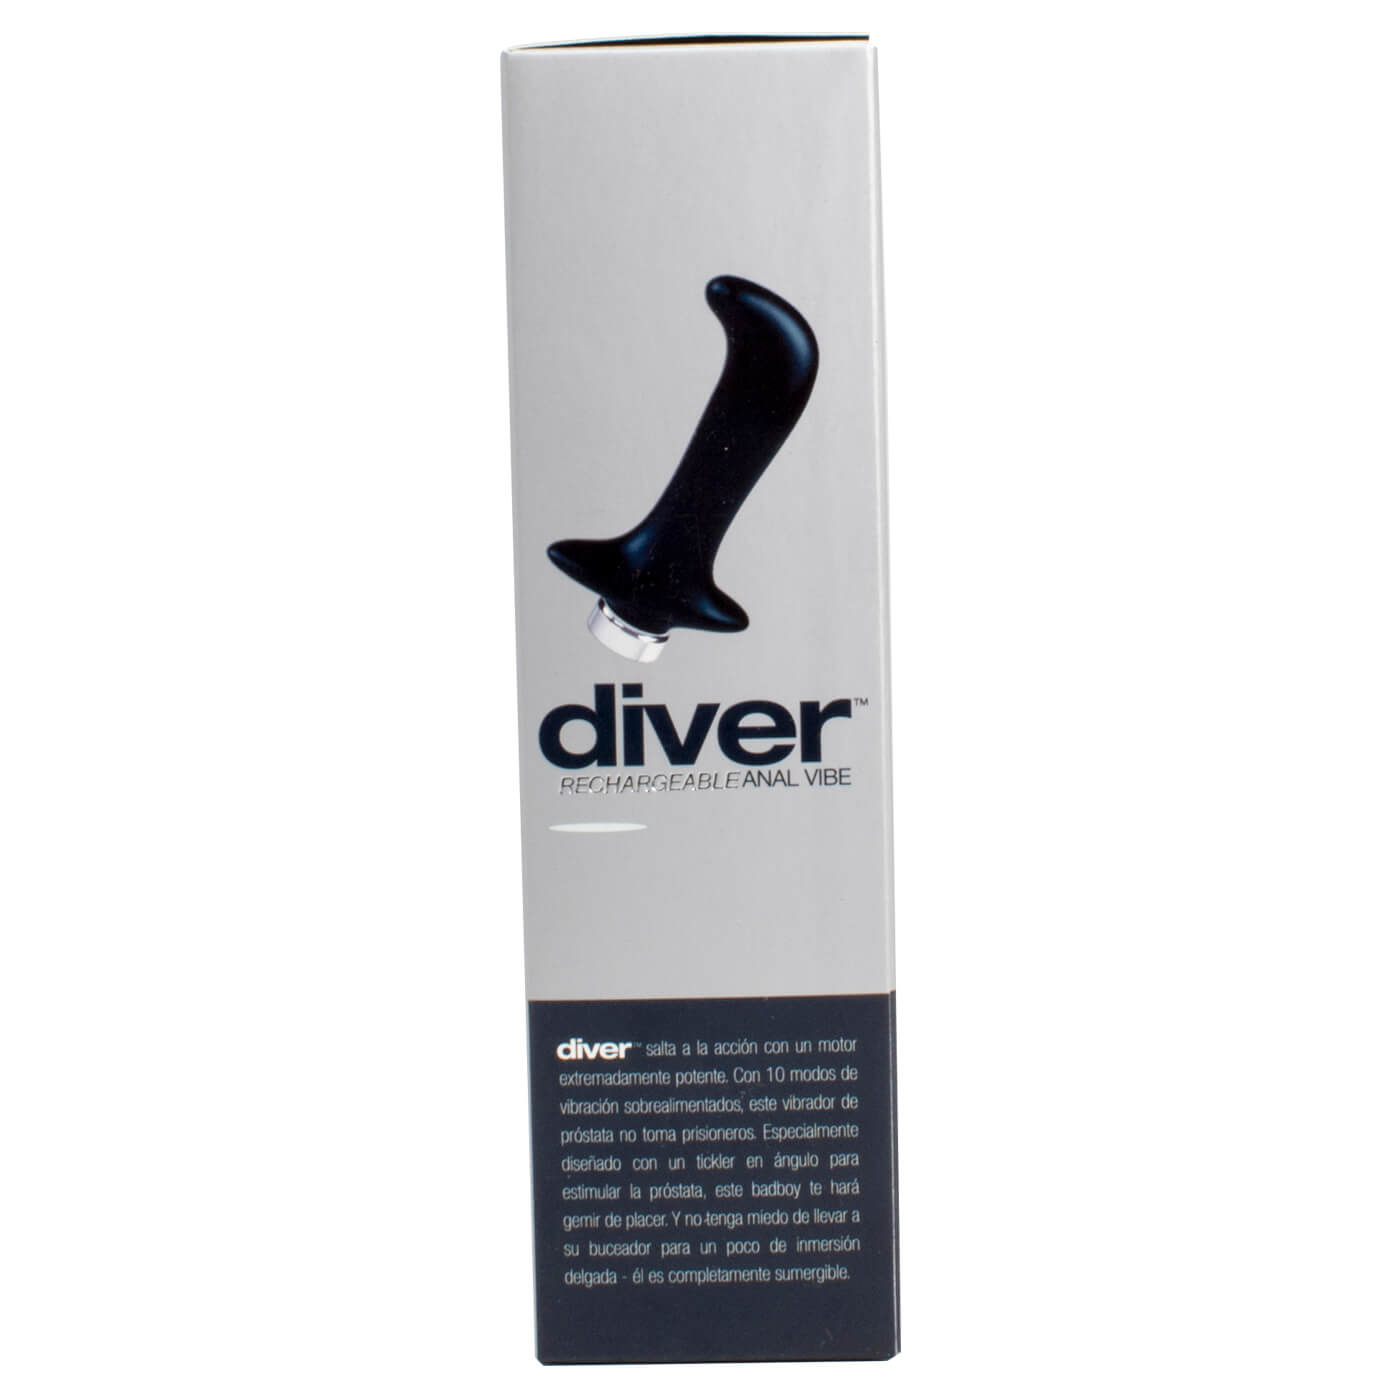 VeDO Diver USB Rechargeable 10 Function Anal Vibe